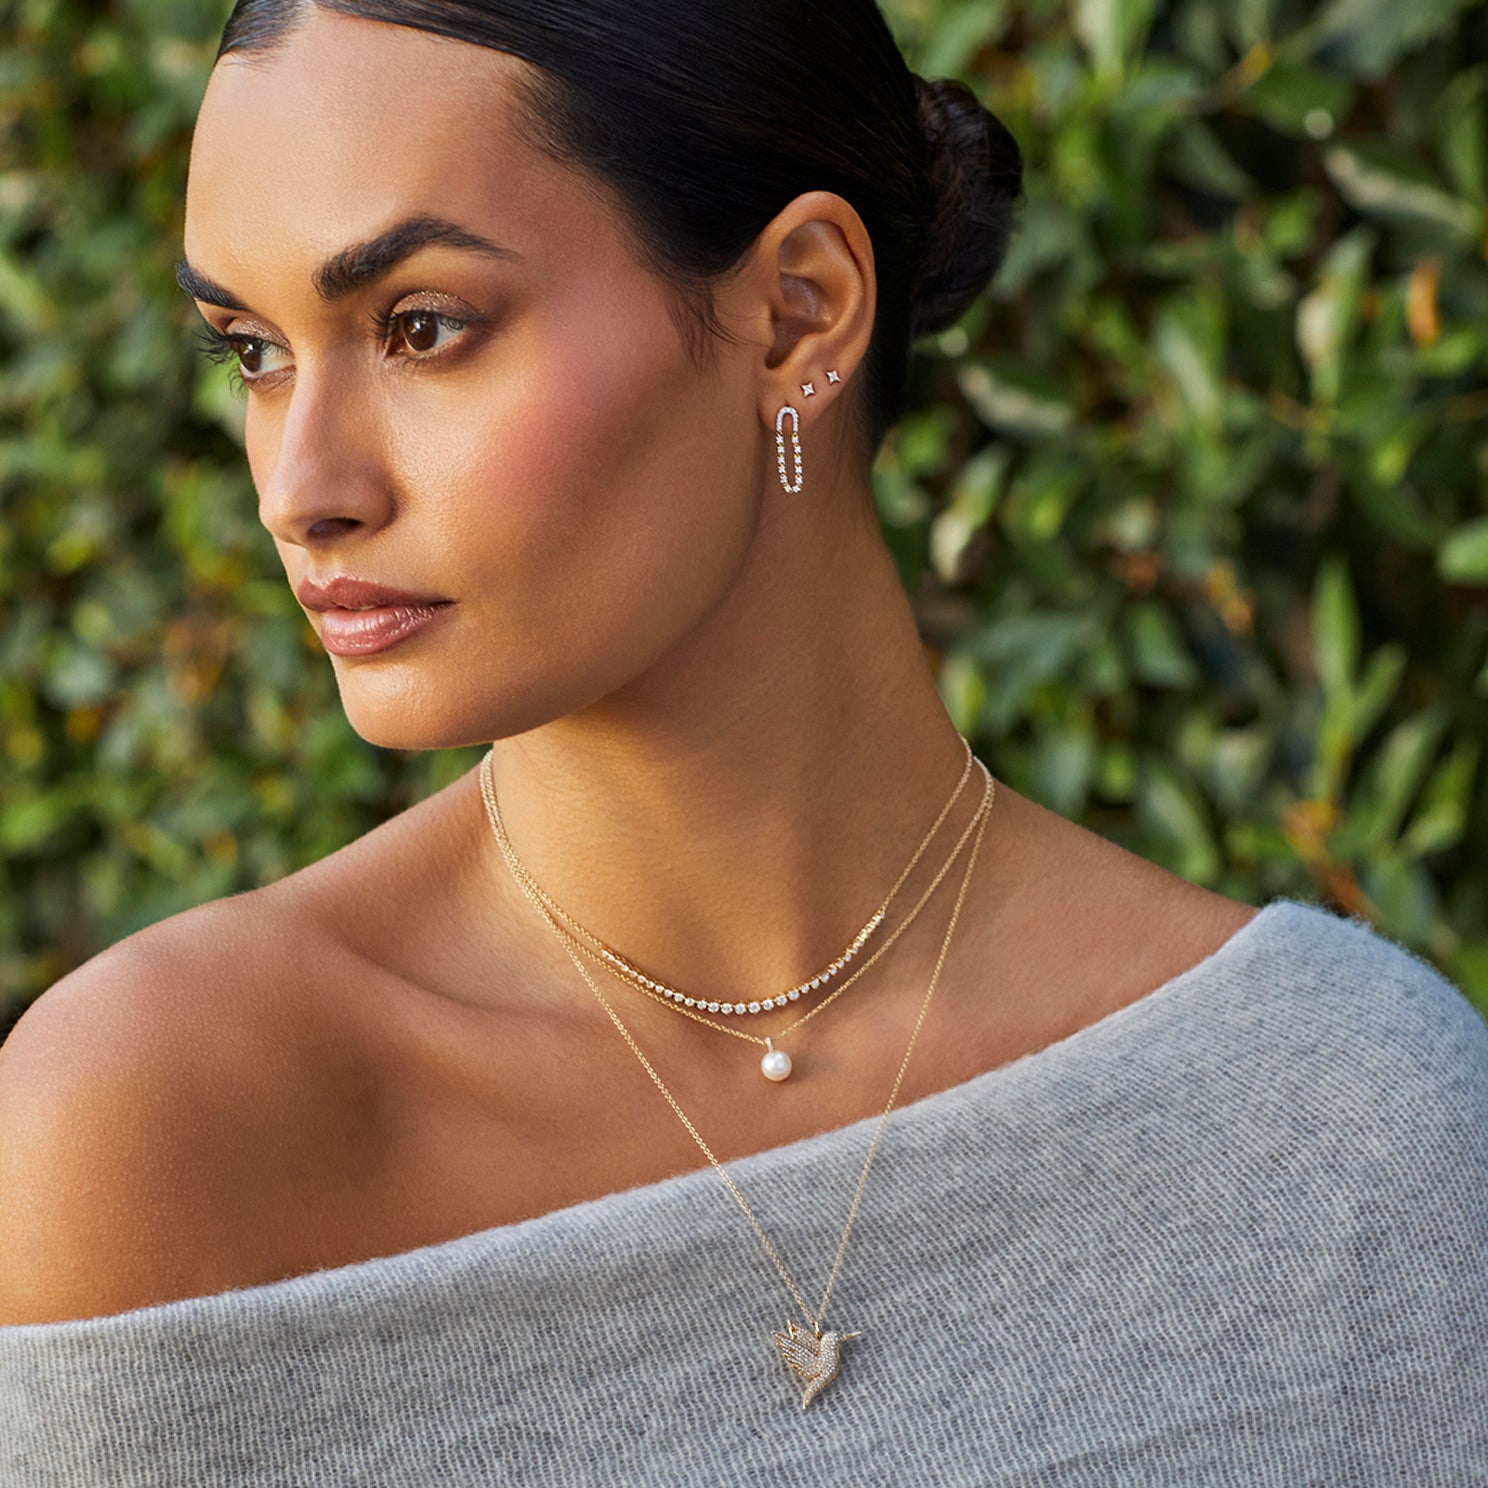 Pearl Ball Drop Necklace in 14k yellow gold styled on neck of model with diamond and hummingbird necklaces